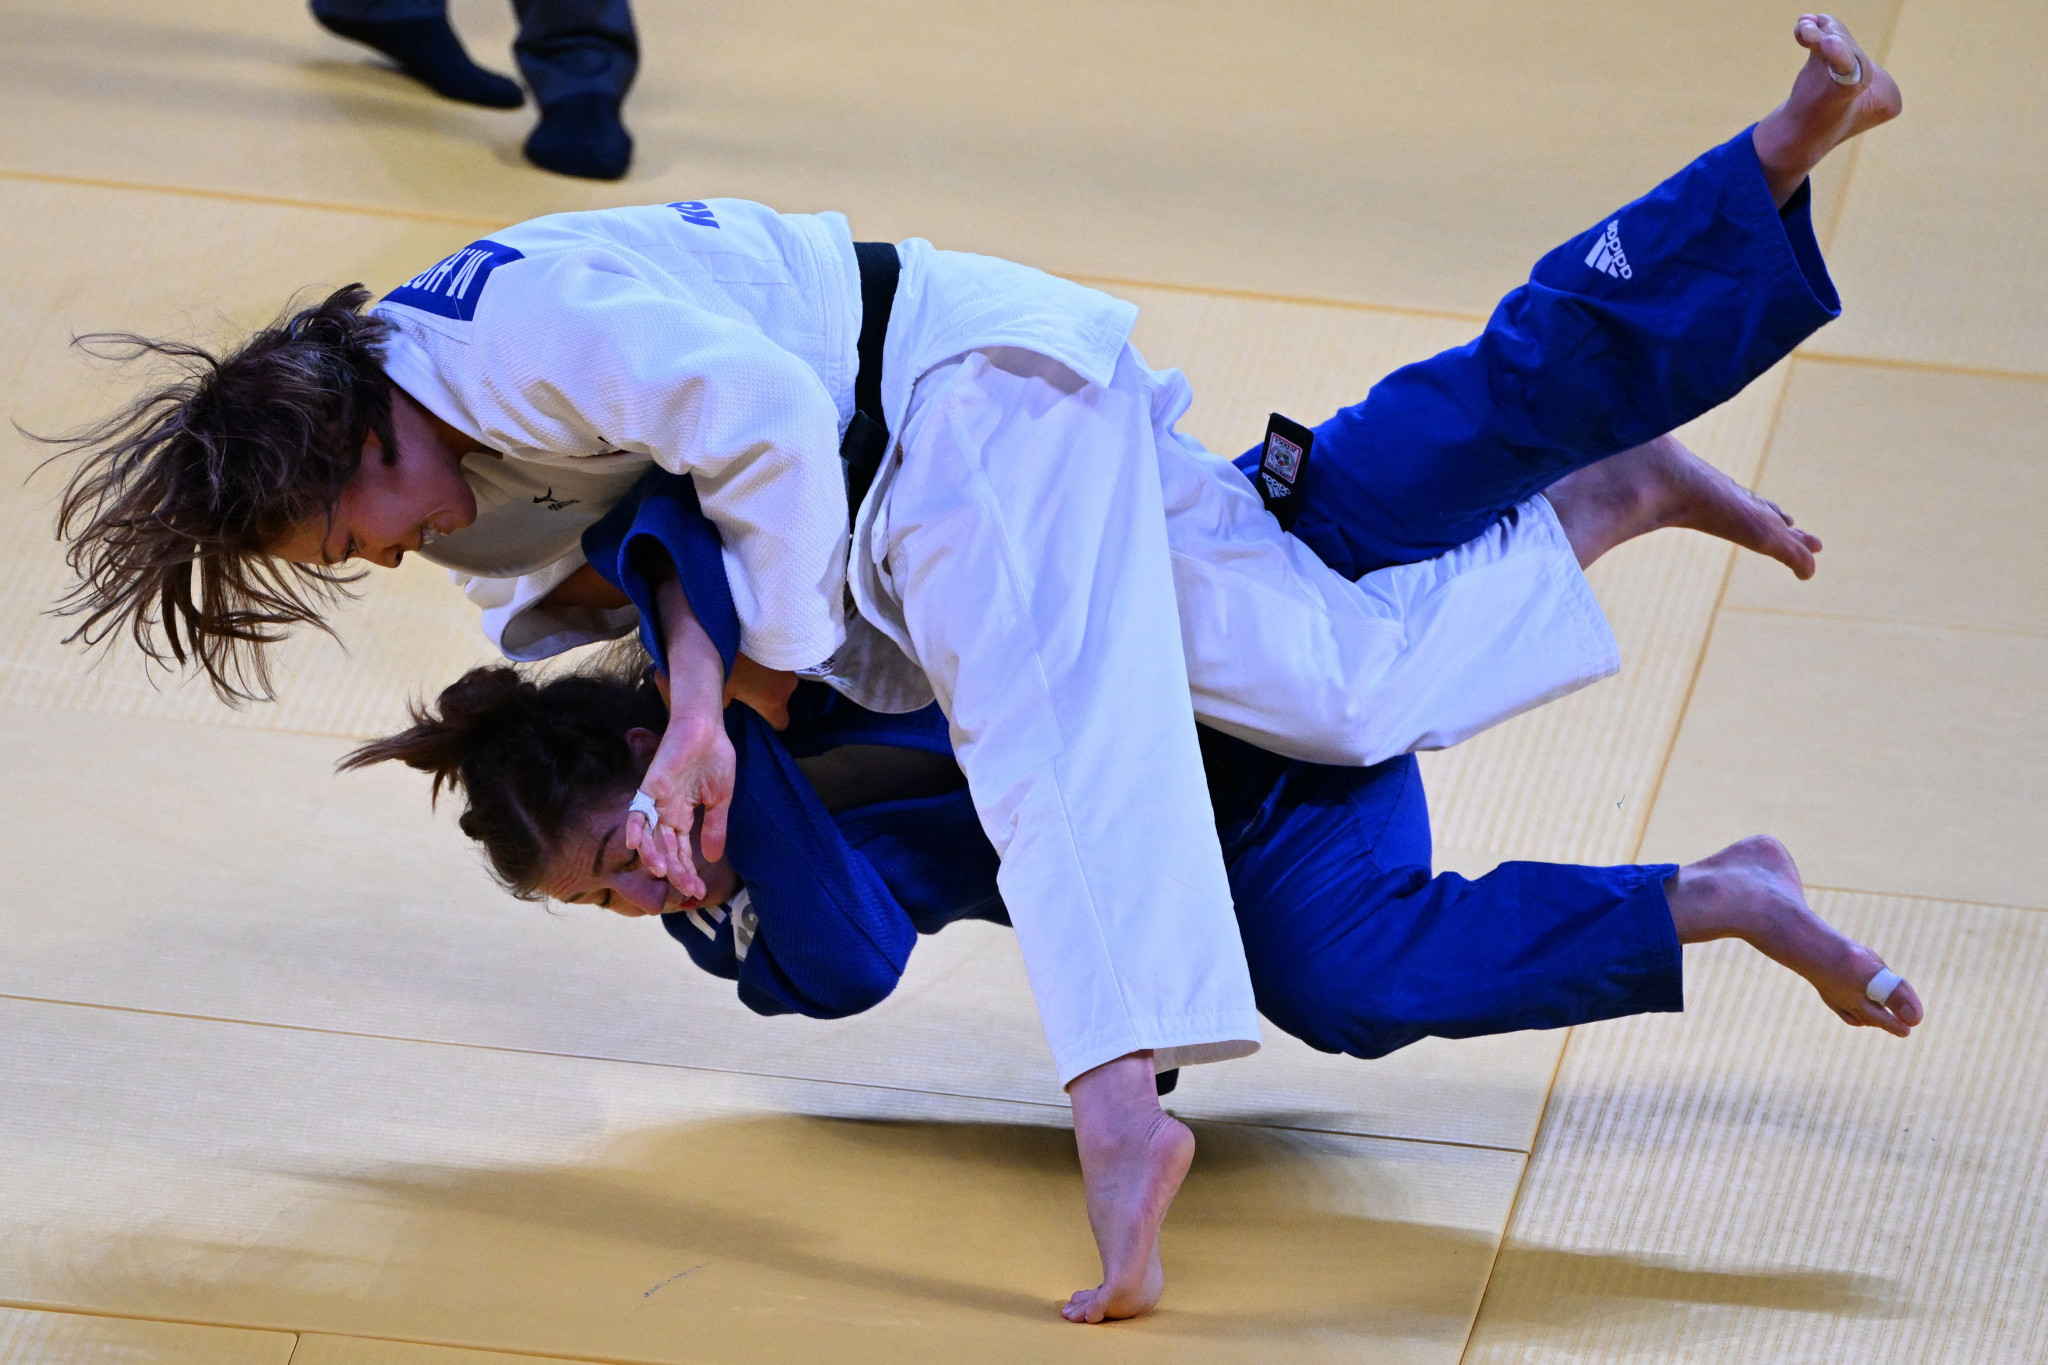 Megumi Horikawa, in white, secured the first World Judo Championships gold medal of her career today in Tashkent ©Getty Images